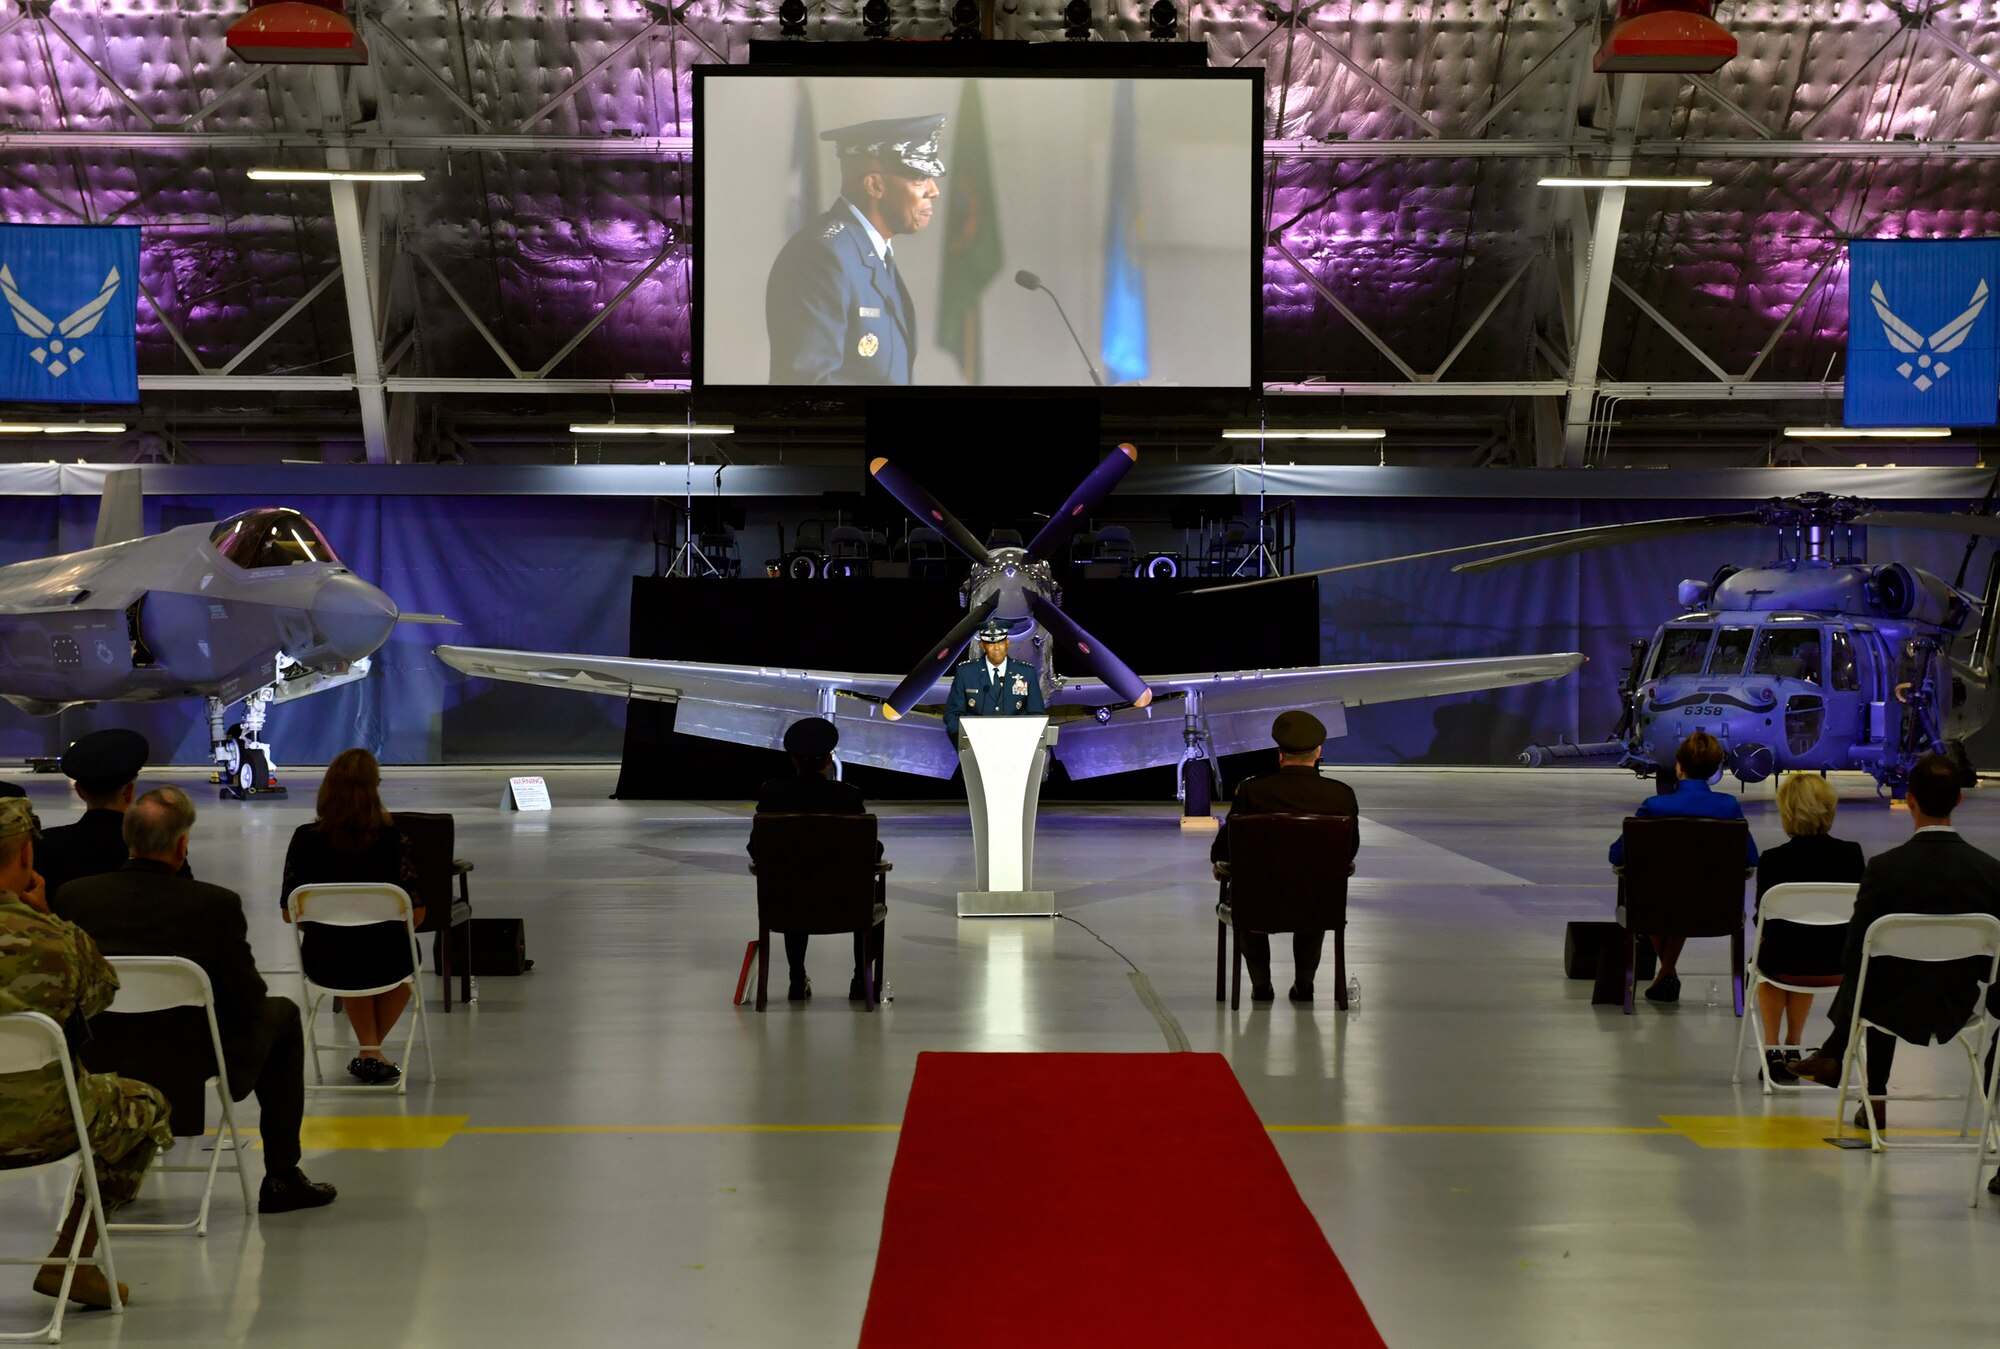 Incoming Air Force Chief of Staff Gen. Charles Q. Brown Jr. speaks during the CSAF change of responsibility ceremony at Joint Base Andrews, Md., Aug. 6, 2020. Brown is the 22nd Chief of Staff of the Air Force. (U.S. Air Force photo by Wayne Clark)